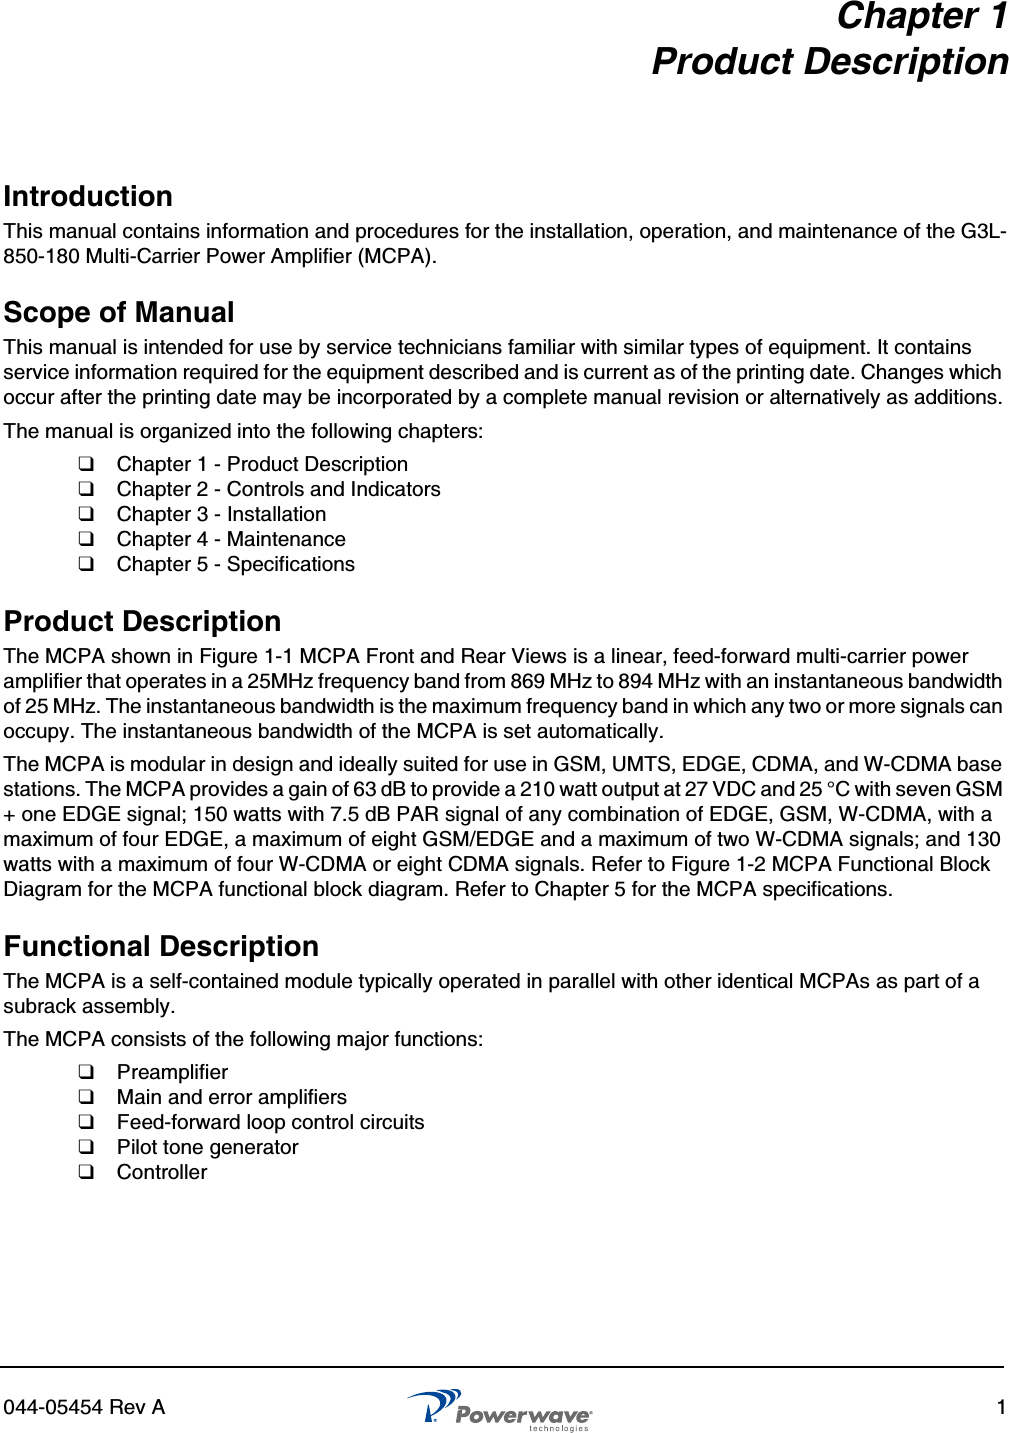 044-05454 Rev A 1Chapter 1Product DescriptionIntroductionThis manual contains information and procedures for the installation, operation, and maintenance of the G3L-850-180 Multi-Carrier Power Amplifier (MCPA).Scope of ManualThis manual is intended for use by service technicians familiar with similar types of equipment. It contains service information required for the equipment described and is current as of the printing date. Changes which occur after the printing date may be incorporated by a complete manual revision or alternatively as additions.The manual is organized into the following chapters:❑  Chapter 1 - Product Description❑  Chapter 2 - Controls and Indicators❑  Chapter 3 - Installation❑  Chapter 4 - Maintenance❑  Chapter 5 - SpecificationsProduct DescriptionThe MCPA shown in Figure 1-1 MCPA Front and Rear Views is a linear, feed-forward multi-carrier power amplifier that operates in a 25MHz frequency band from 869 MHz to 894 MHz with an instantaneous bandwidth of 25 MHz. The instantaneous bandwidth is the maximum frequency band in which any two or more signals can occupy. The instantaneous bandwidth of the MCPA is set automatically.The MCPA is modular in design and ideally suited for use in GSM, UMTS, EDGE, CDMA, and W-CDMA base stations. The MCPA provides a gain of 63 dB to provide a 210 watt output at 27 VDC and 25 °C with seven GSM + one EDGE signal; 150 watts with 7.5 dB PAR signal of any combination of EDGE, GSM, W-CDMA, with a maximum of four EDGE, a maximum of eight GSM/EDGE and a maximum of two W-CDMA signals; and 130 watts with a maximum of four W-CDMA or eight CDMA signals. Refer to Figure 1-2 MCPA Functional Block Diagram for the MCPA functional block diagram. Refer to Chapter 5 for the MCPA specifications.Functional DescriptionThe MCPA is a self-contained module typically operated in parallel with other identical MCPAs as part of a subrack assembly. The MCPA consists of the following major functions:❑  Preamplifier ❑  Main and error amplifiers❑  Feed-forward loop control circuits❑  Pilot tone generator❑  Controller